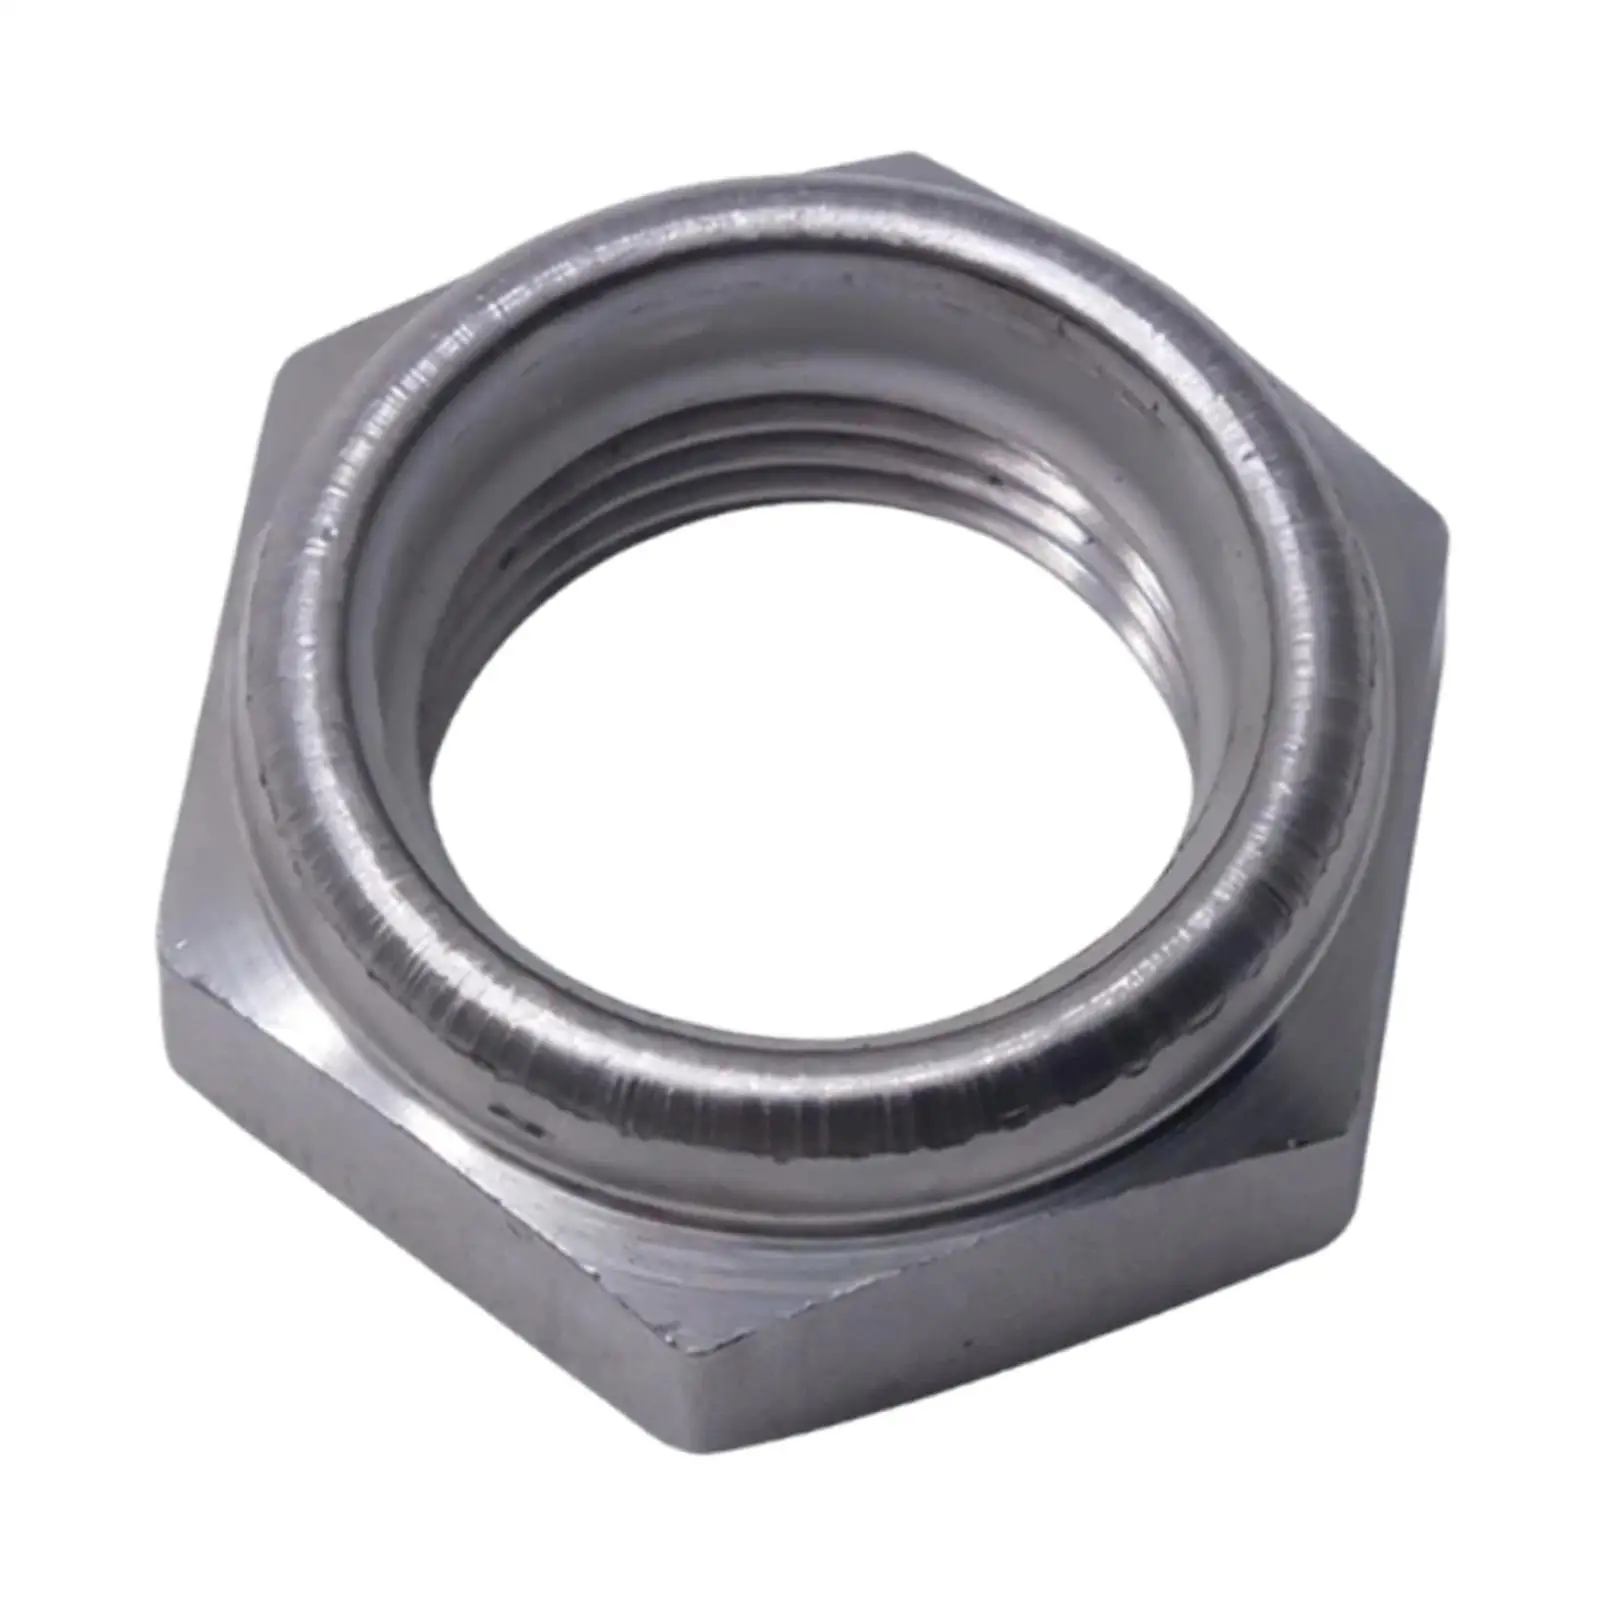 Replacement Self Locking Nut 90185-22043 Sturdy for Yamaha Convenient Installation Automotive Accessories Good Performance